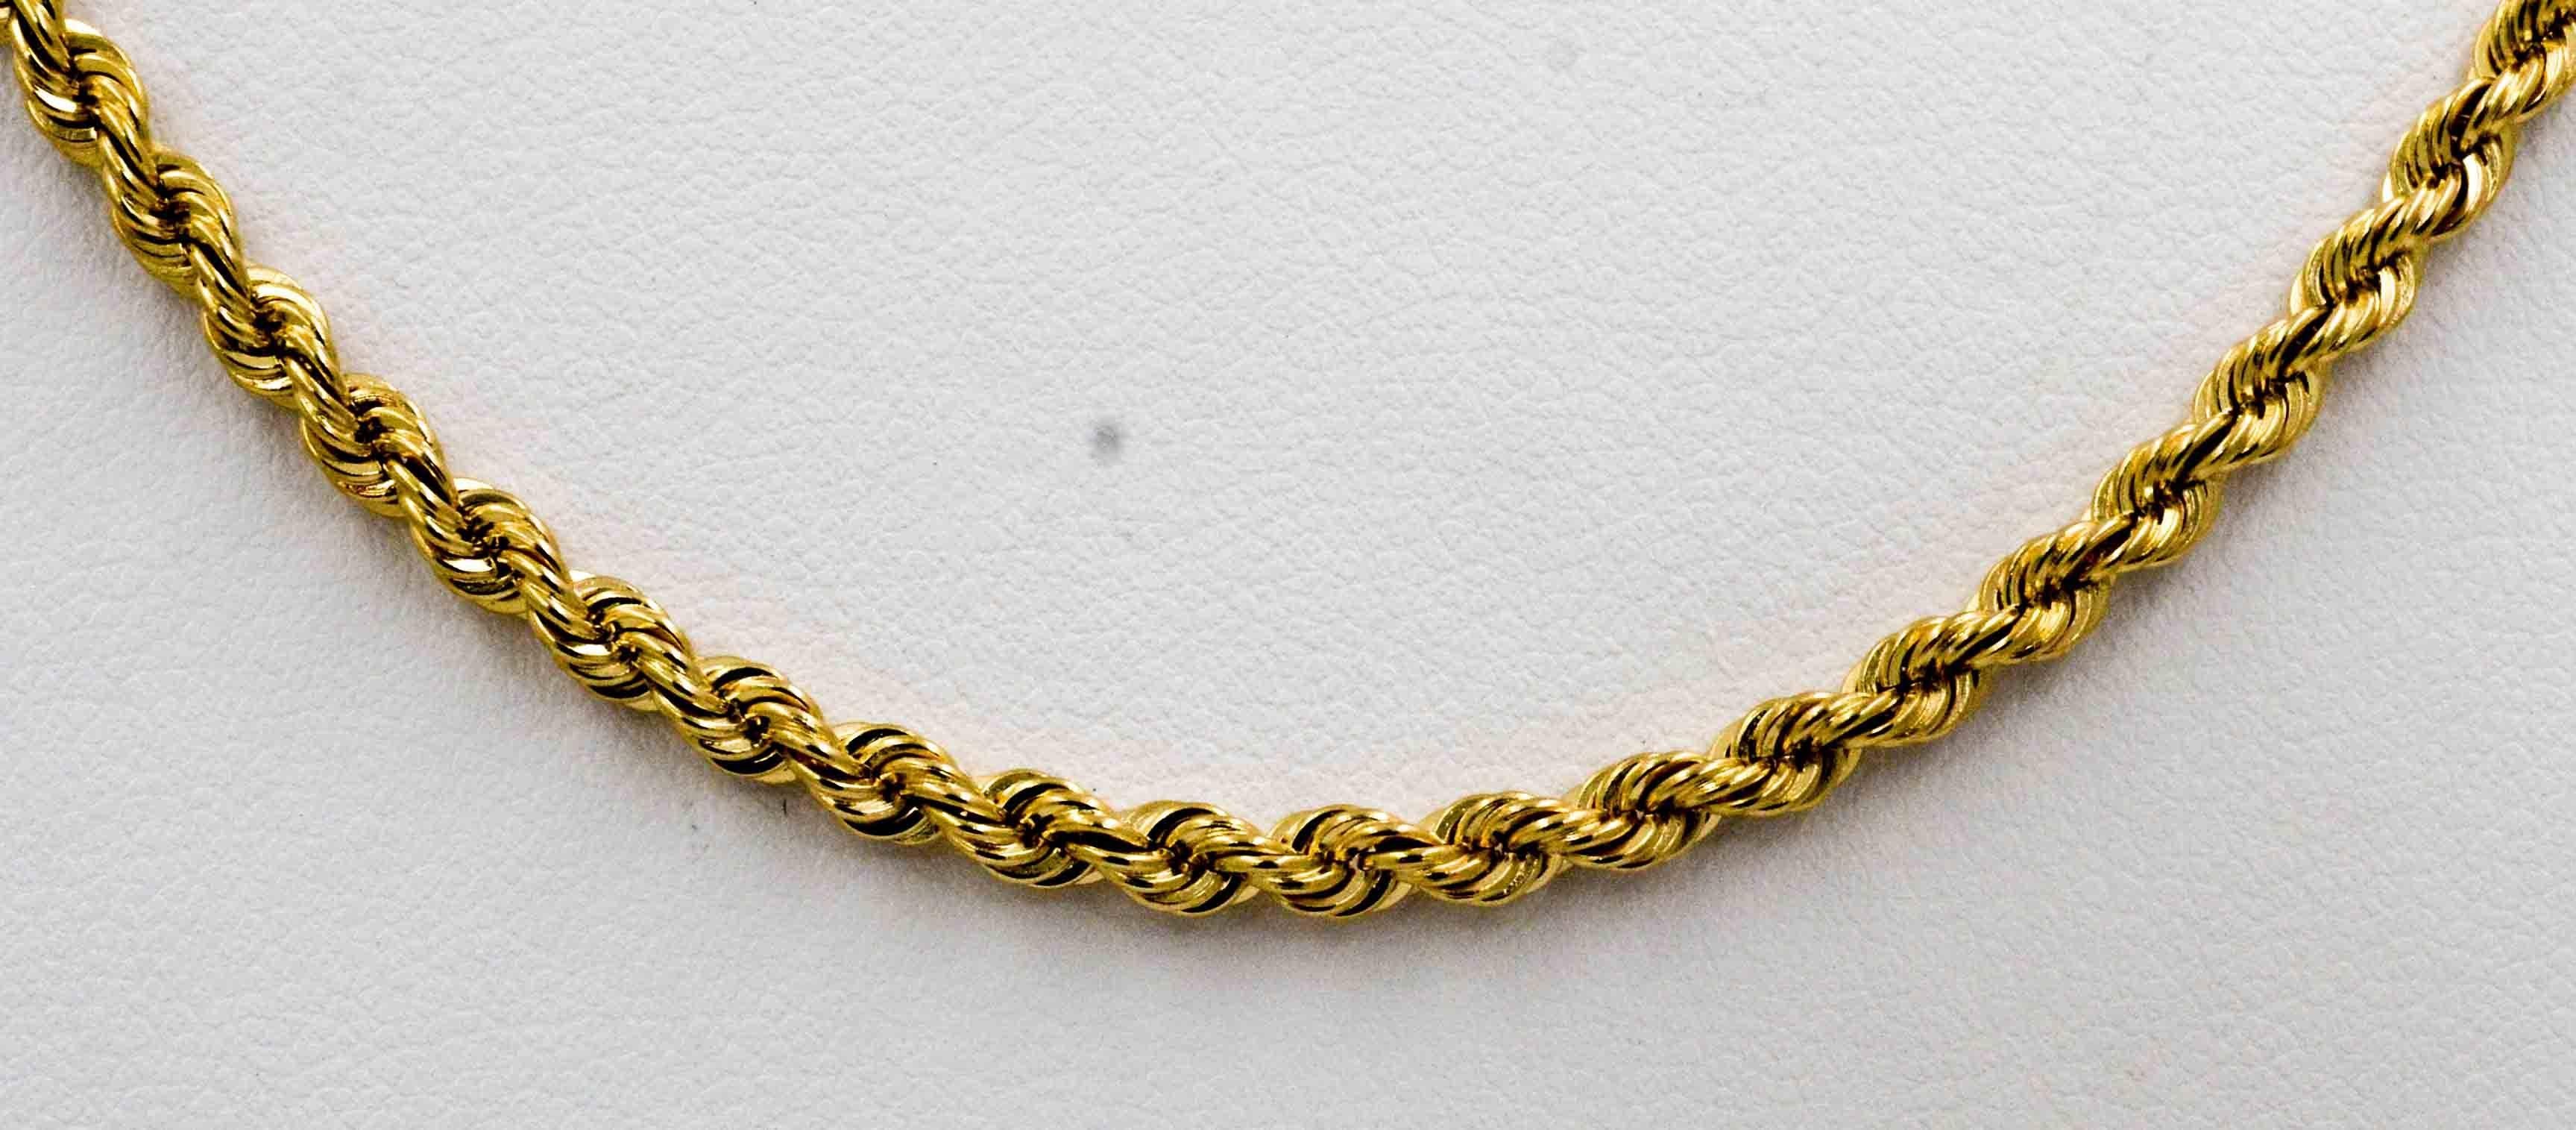 Enjoy the clear simplicity of a classic 14kt yellow gold rope chain that is 3 mm thick and 24 inches long.  The chain is closed with a 14kt yellow gold barrel clasp.